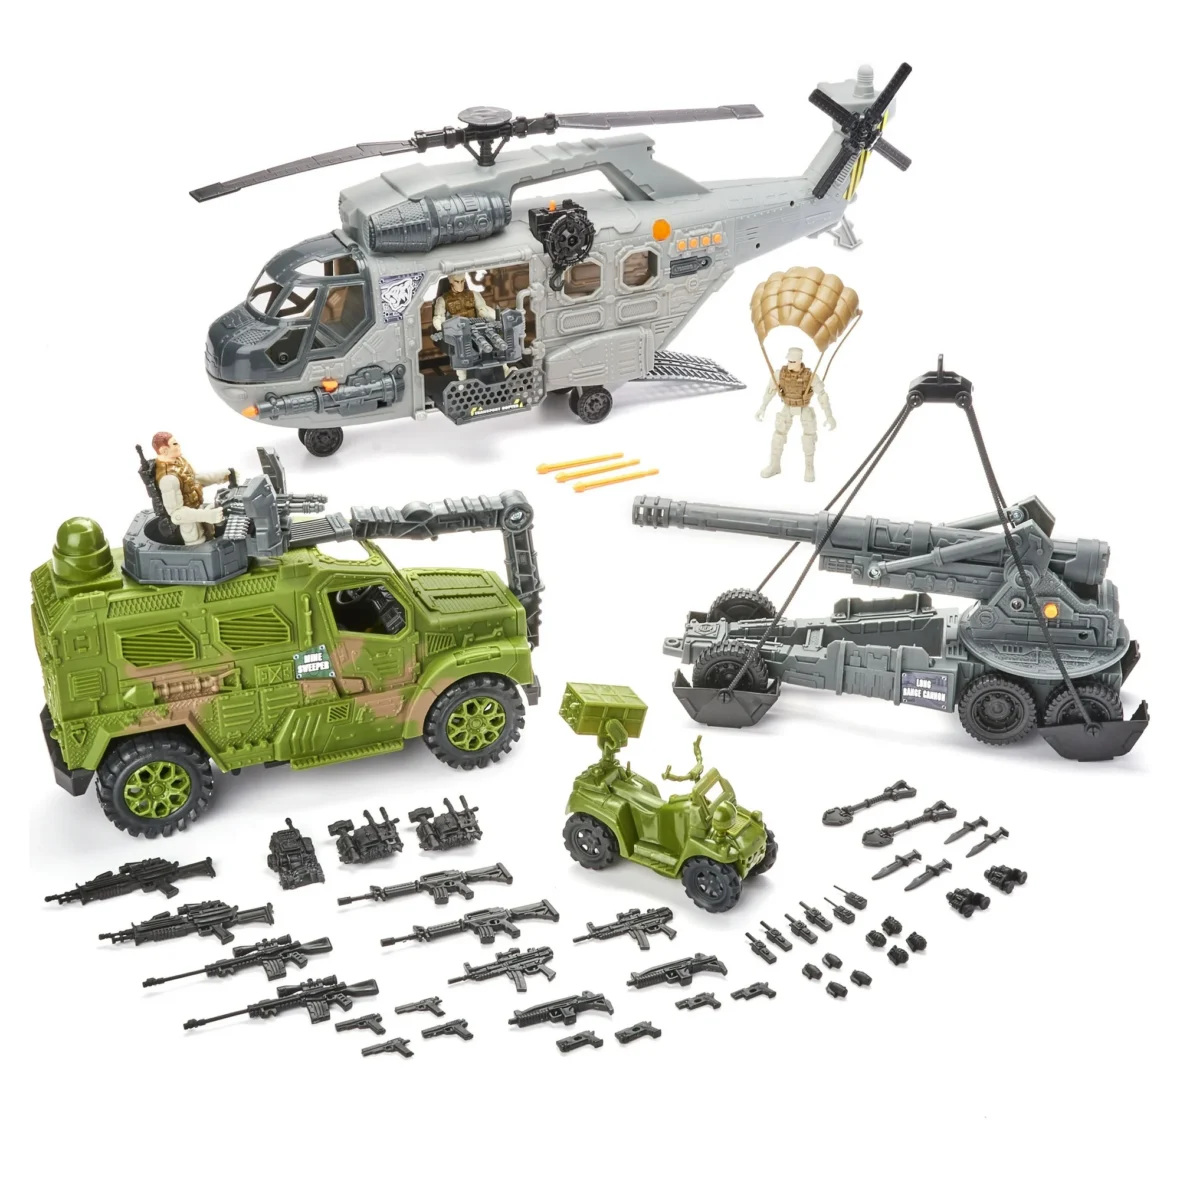 Kid-Connection-Military-Giant-Copter-Play-Set-57-Pieces_d40cdc67-14cc-40d8-828d-838f6ecc2026.988a915c22511fbd1f68df1ded8dac83